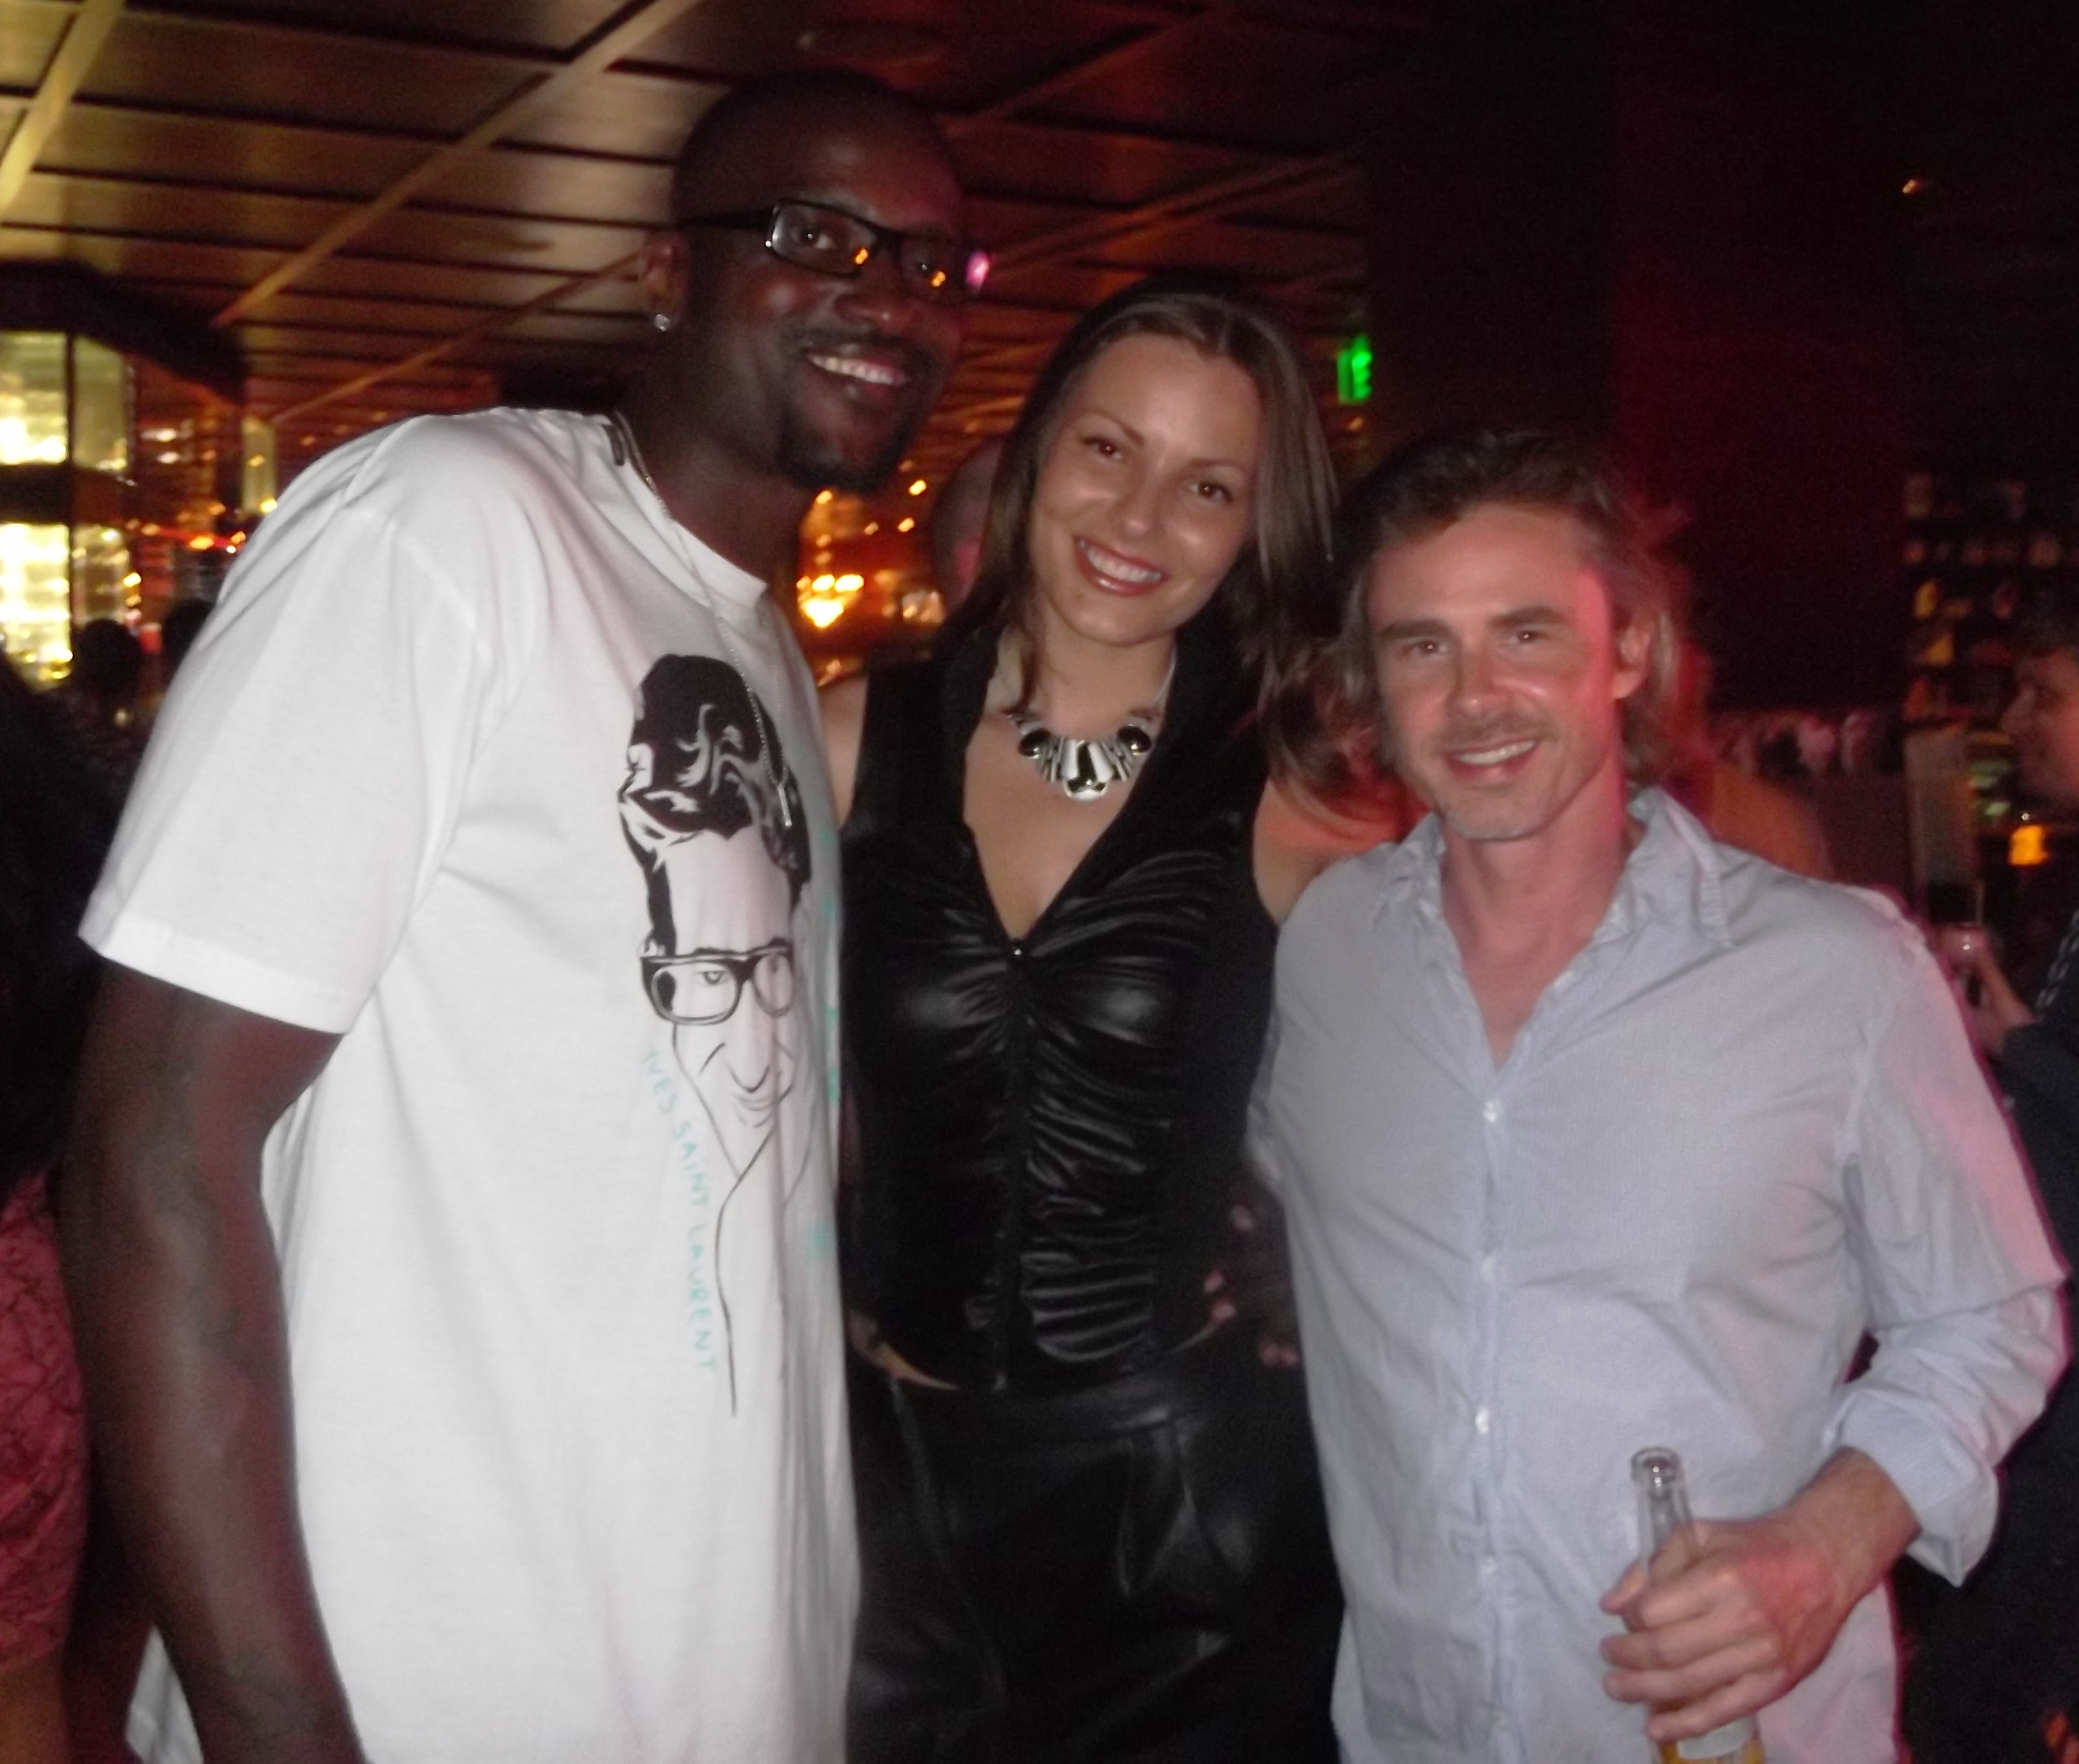 Wrap party with True Blood co-star Sam Trammell